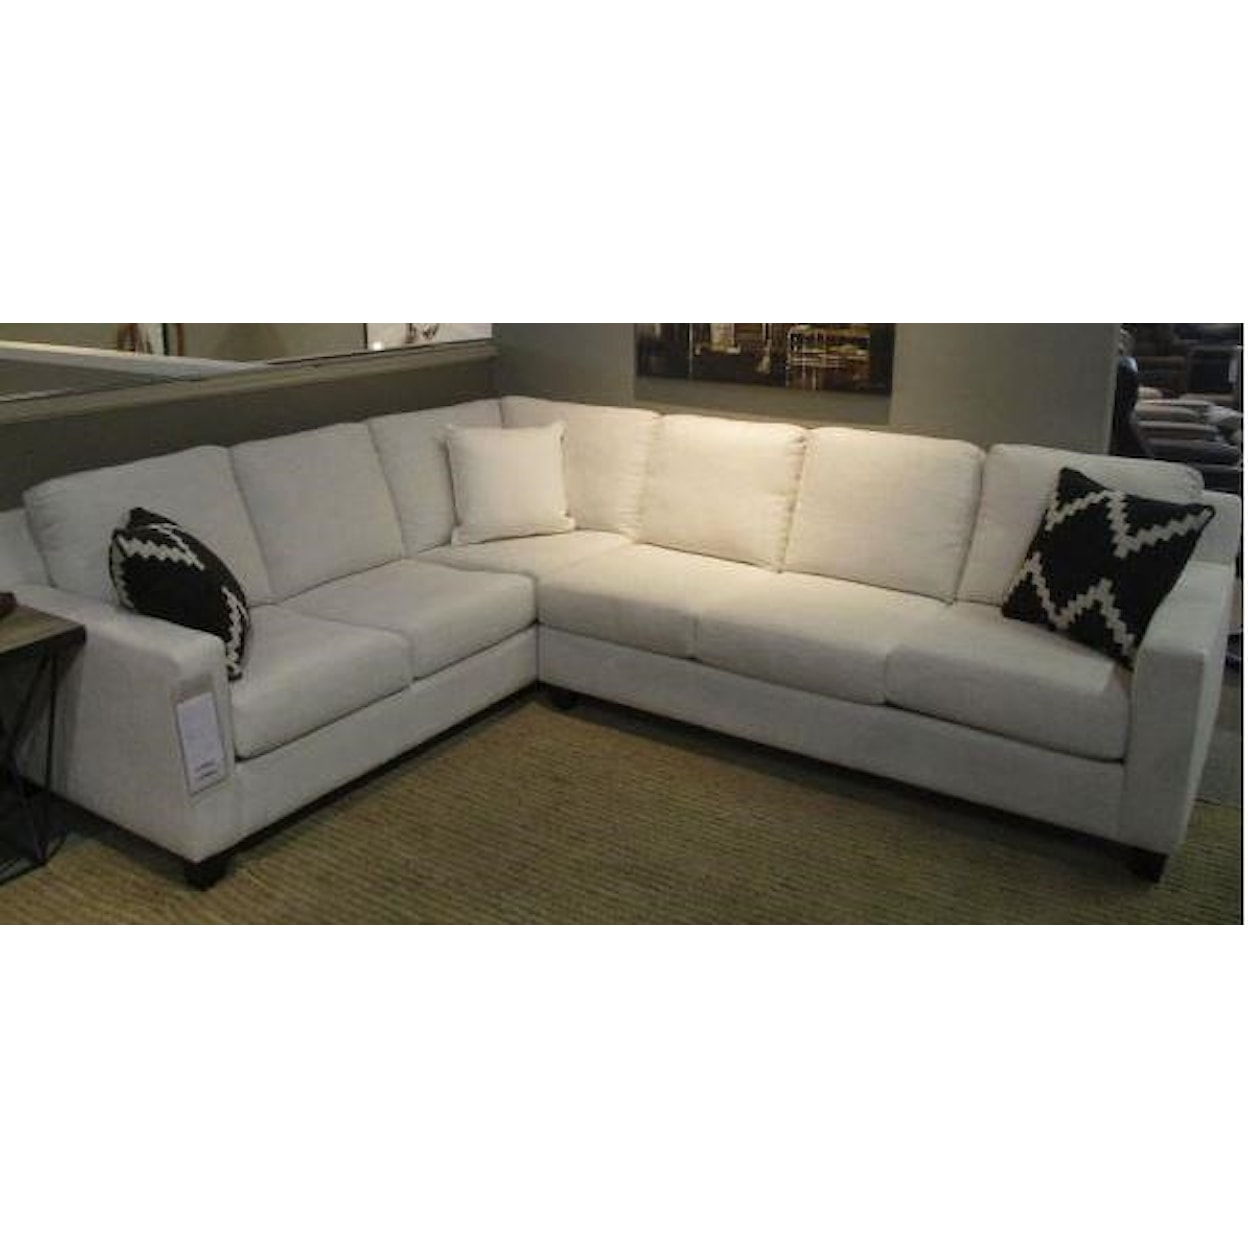 Brentwood Classics Finley 2 Piece sectional